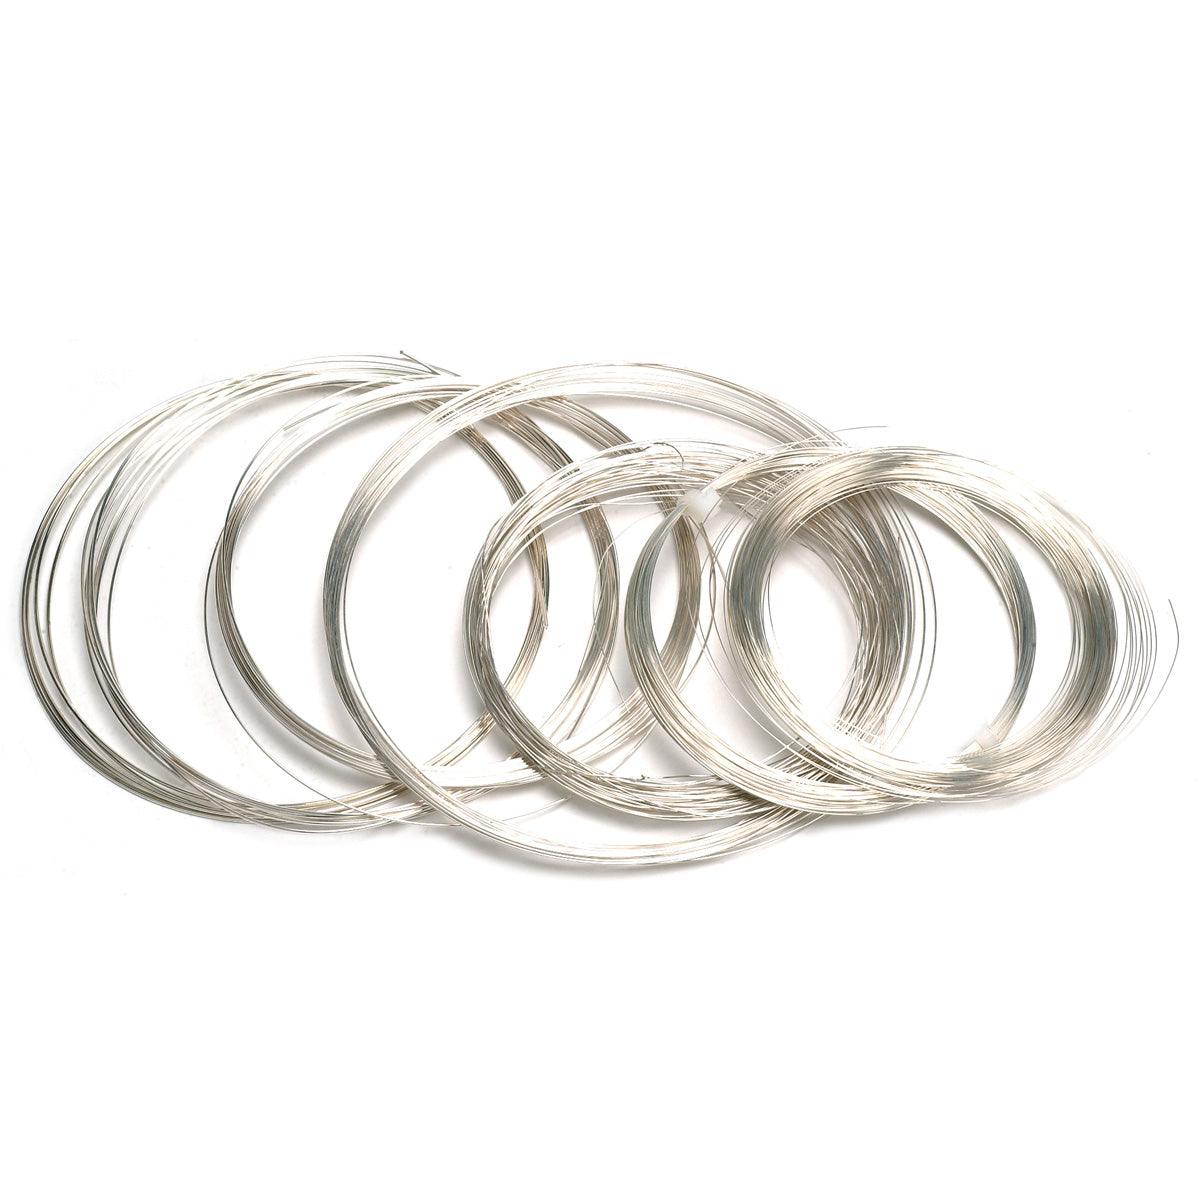 Sterling Silver Dead Soft Round Wire Spools